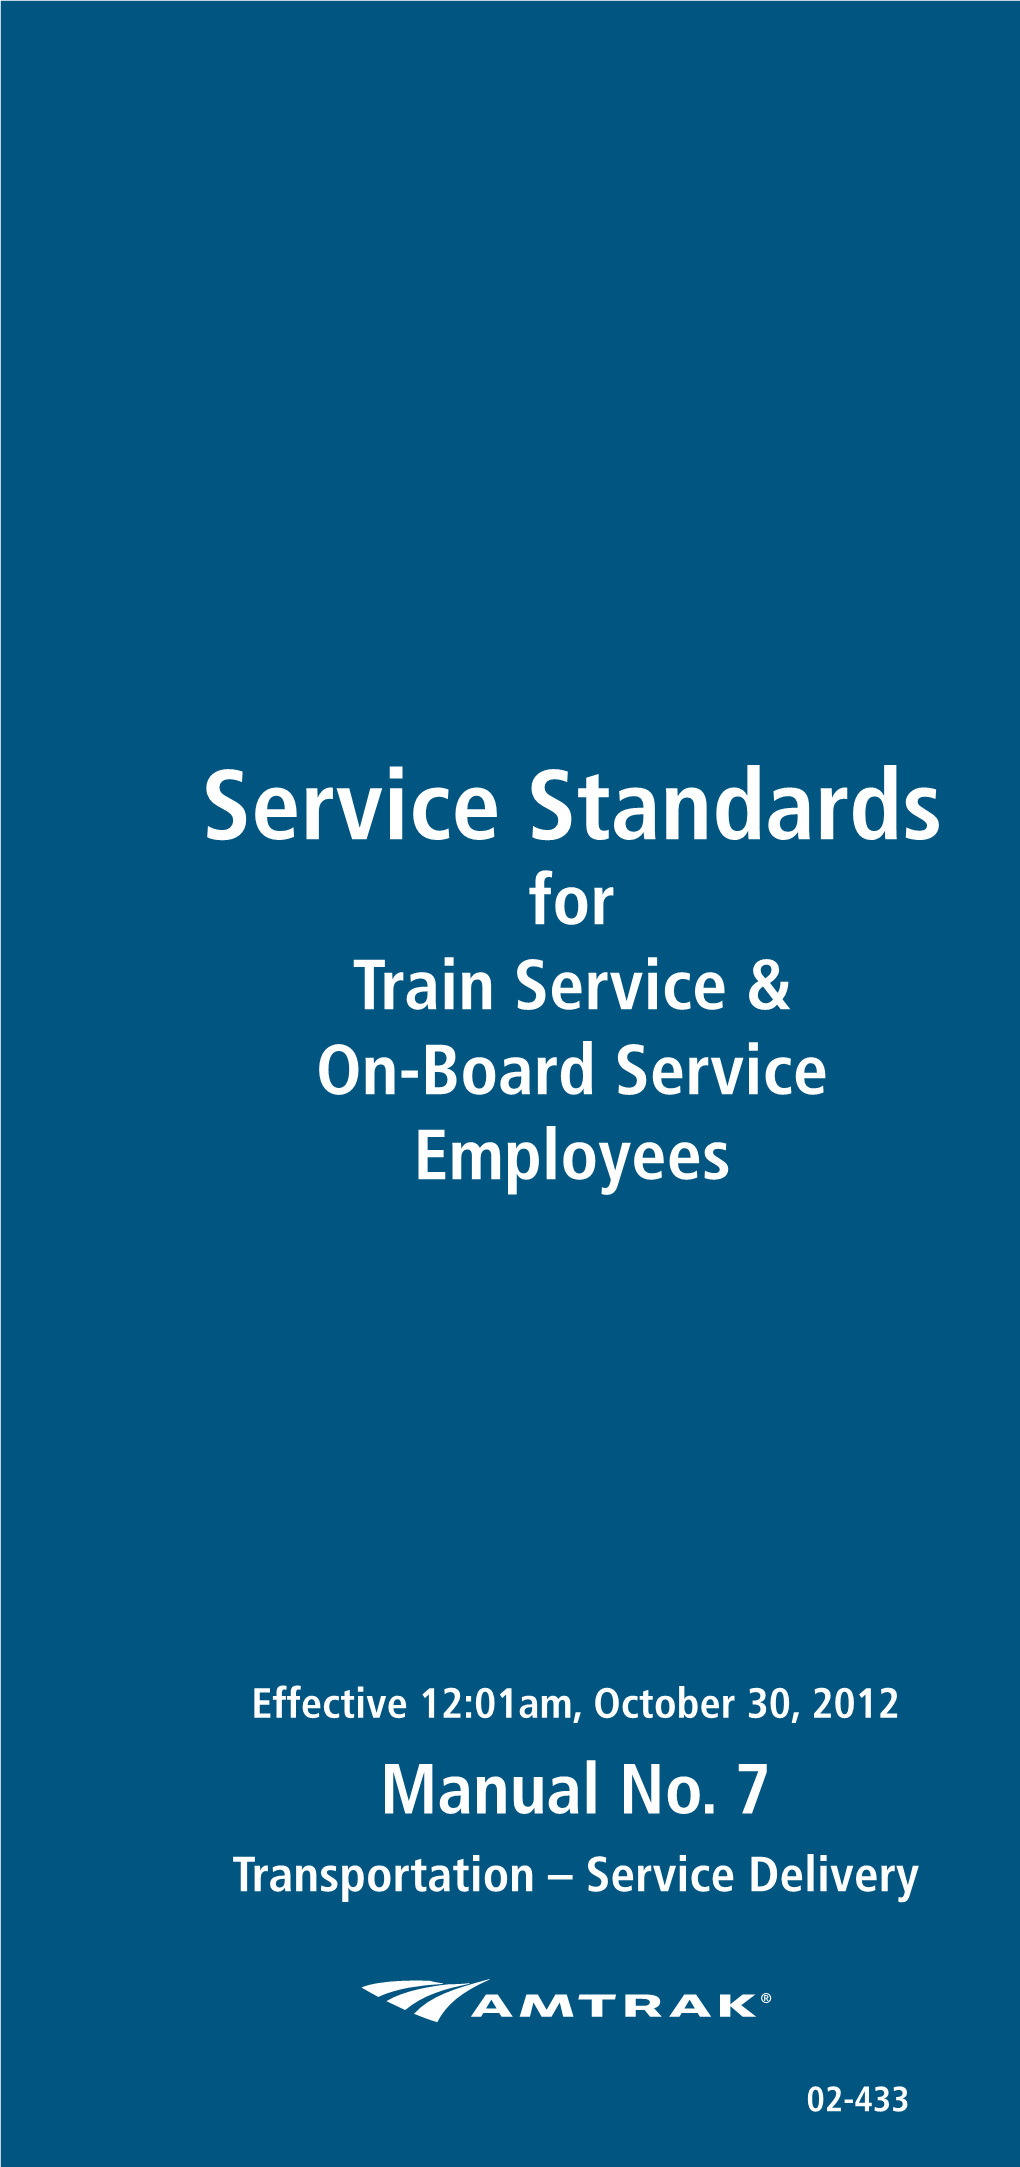 Service Standards for Train Service & On-Board Service Employees